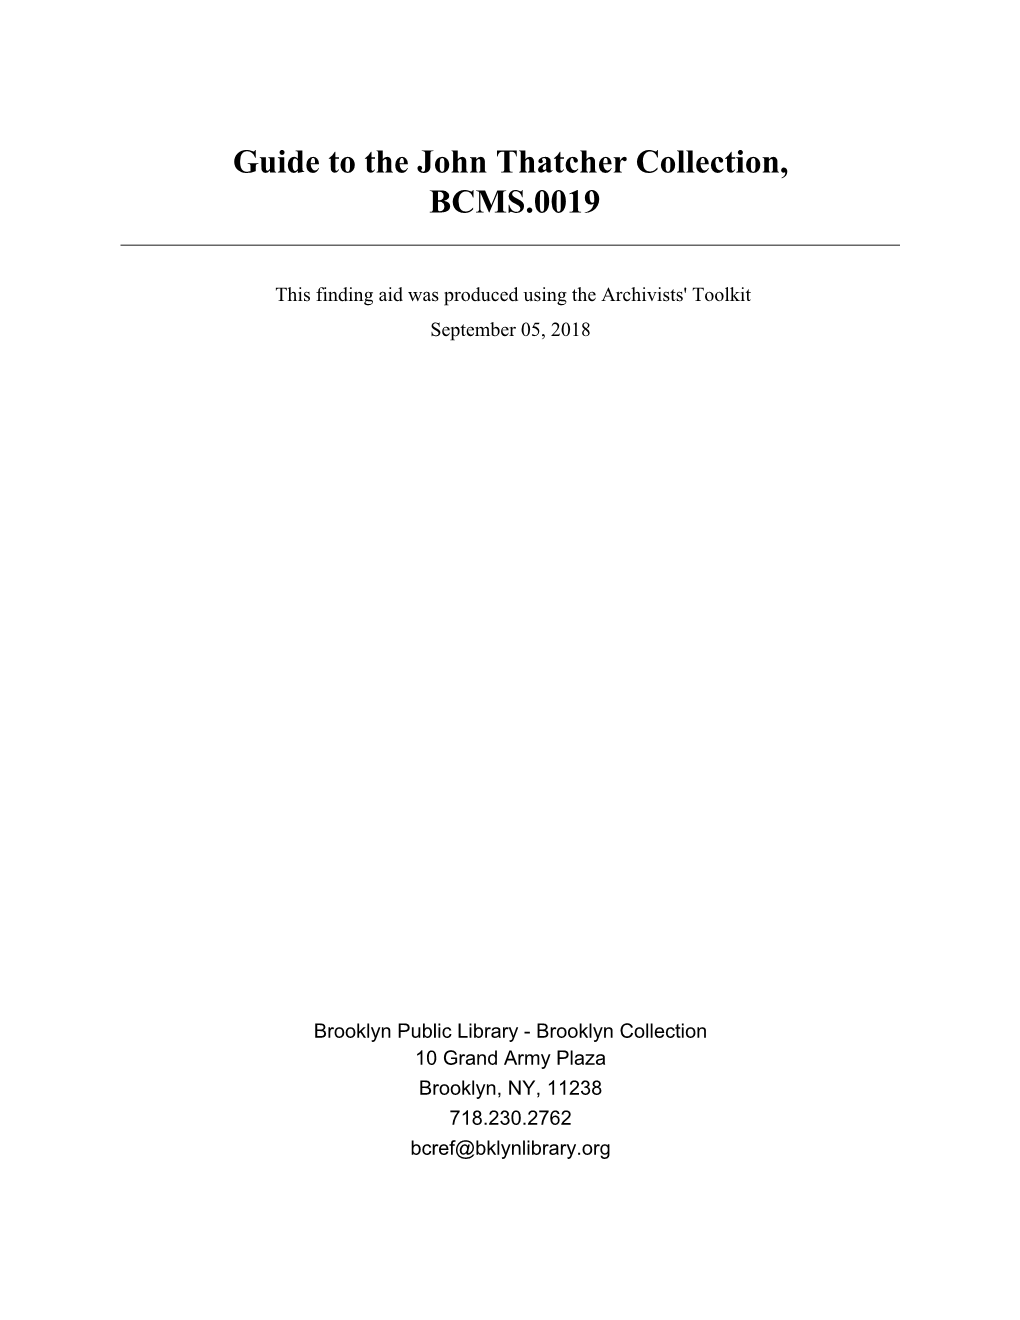 Guide to the John Thatcher Collection, BCMS.0019